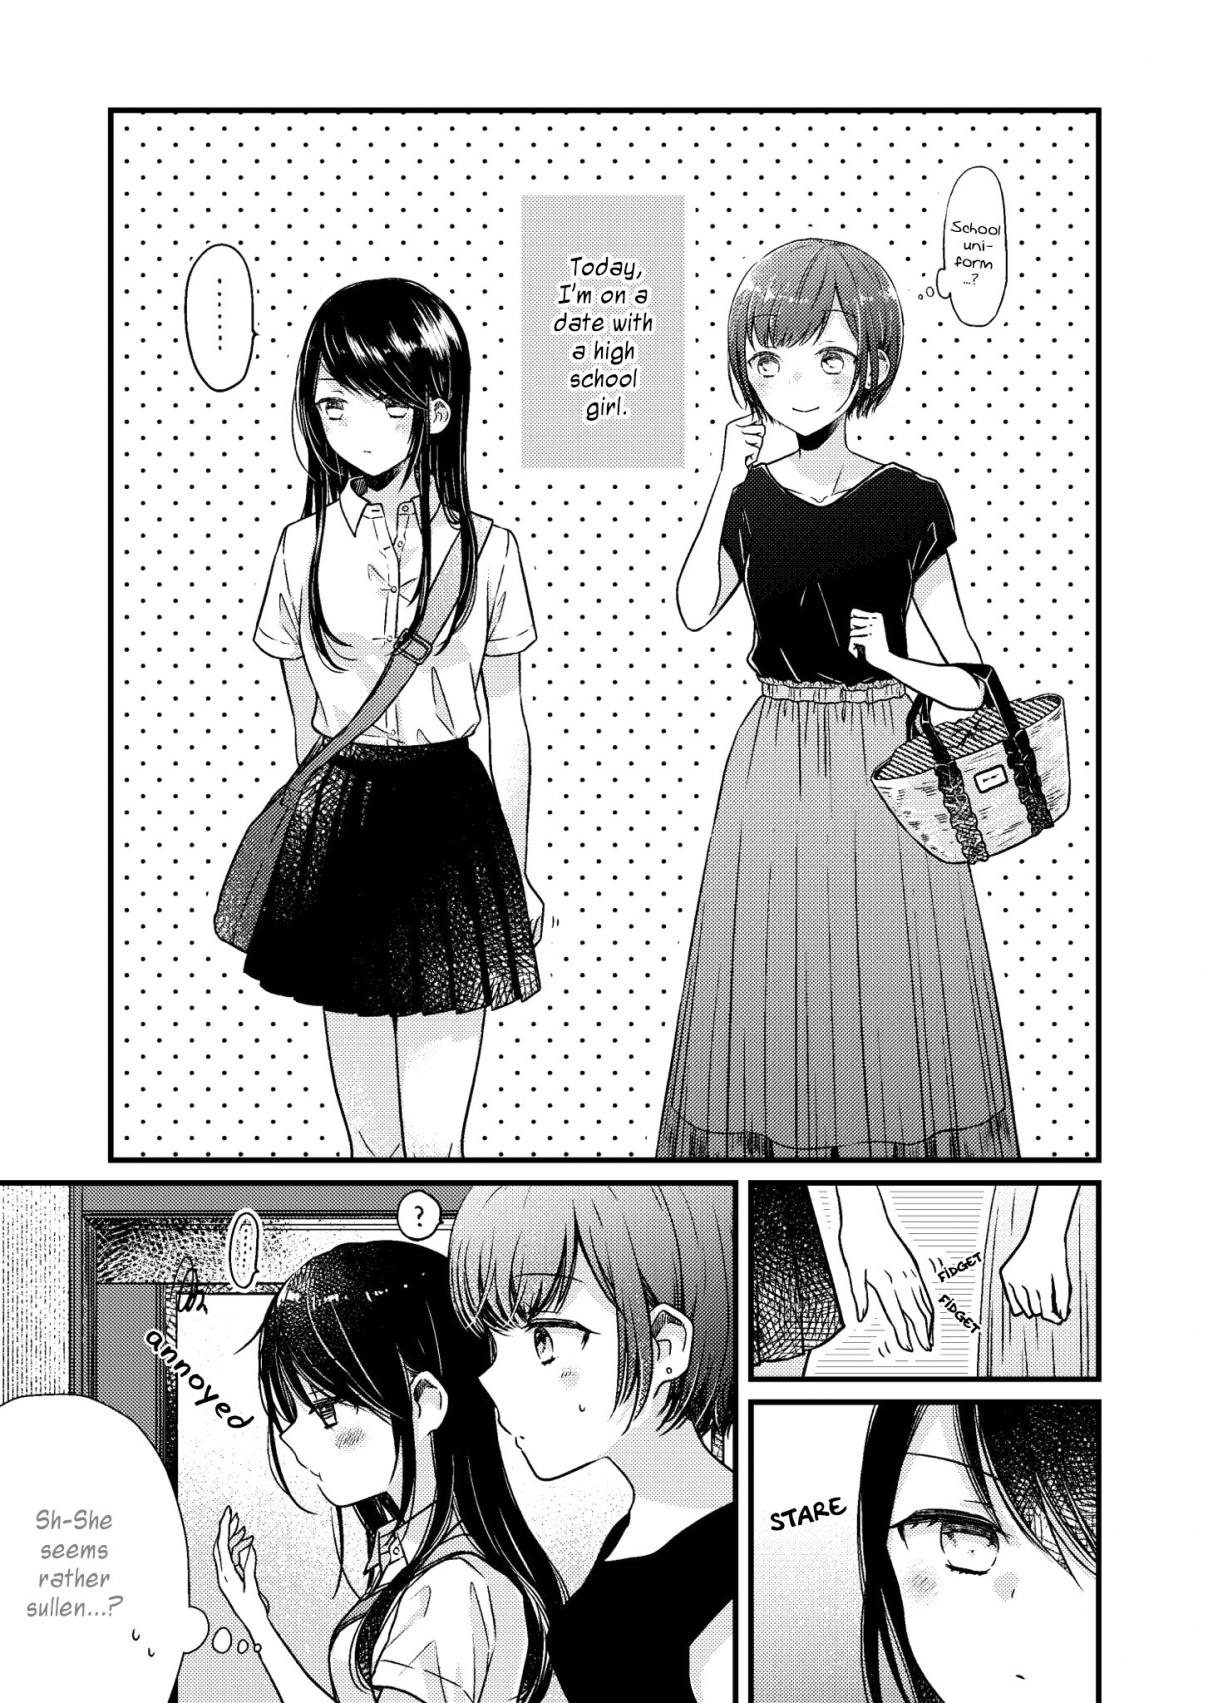 It's Painful That I Have No Idea What High School Girls Are Thinking Of These Days Vol. 1 Ch. 5